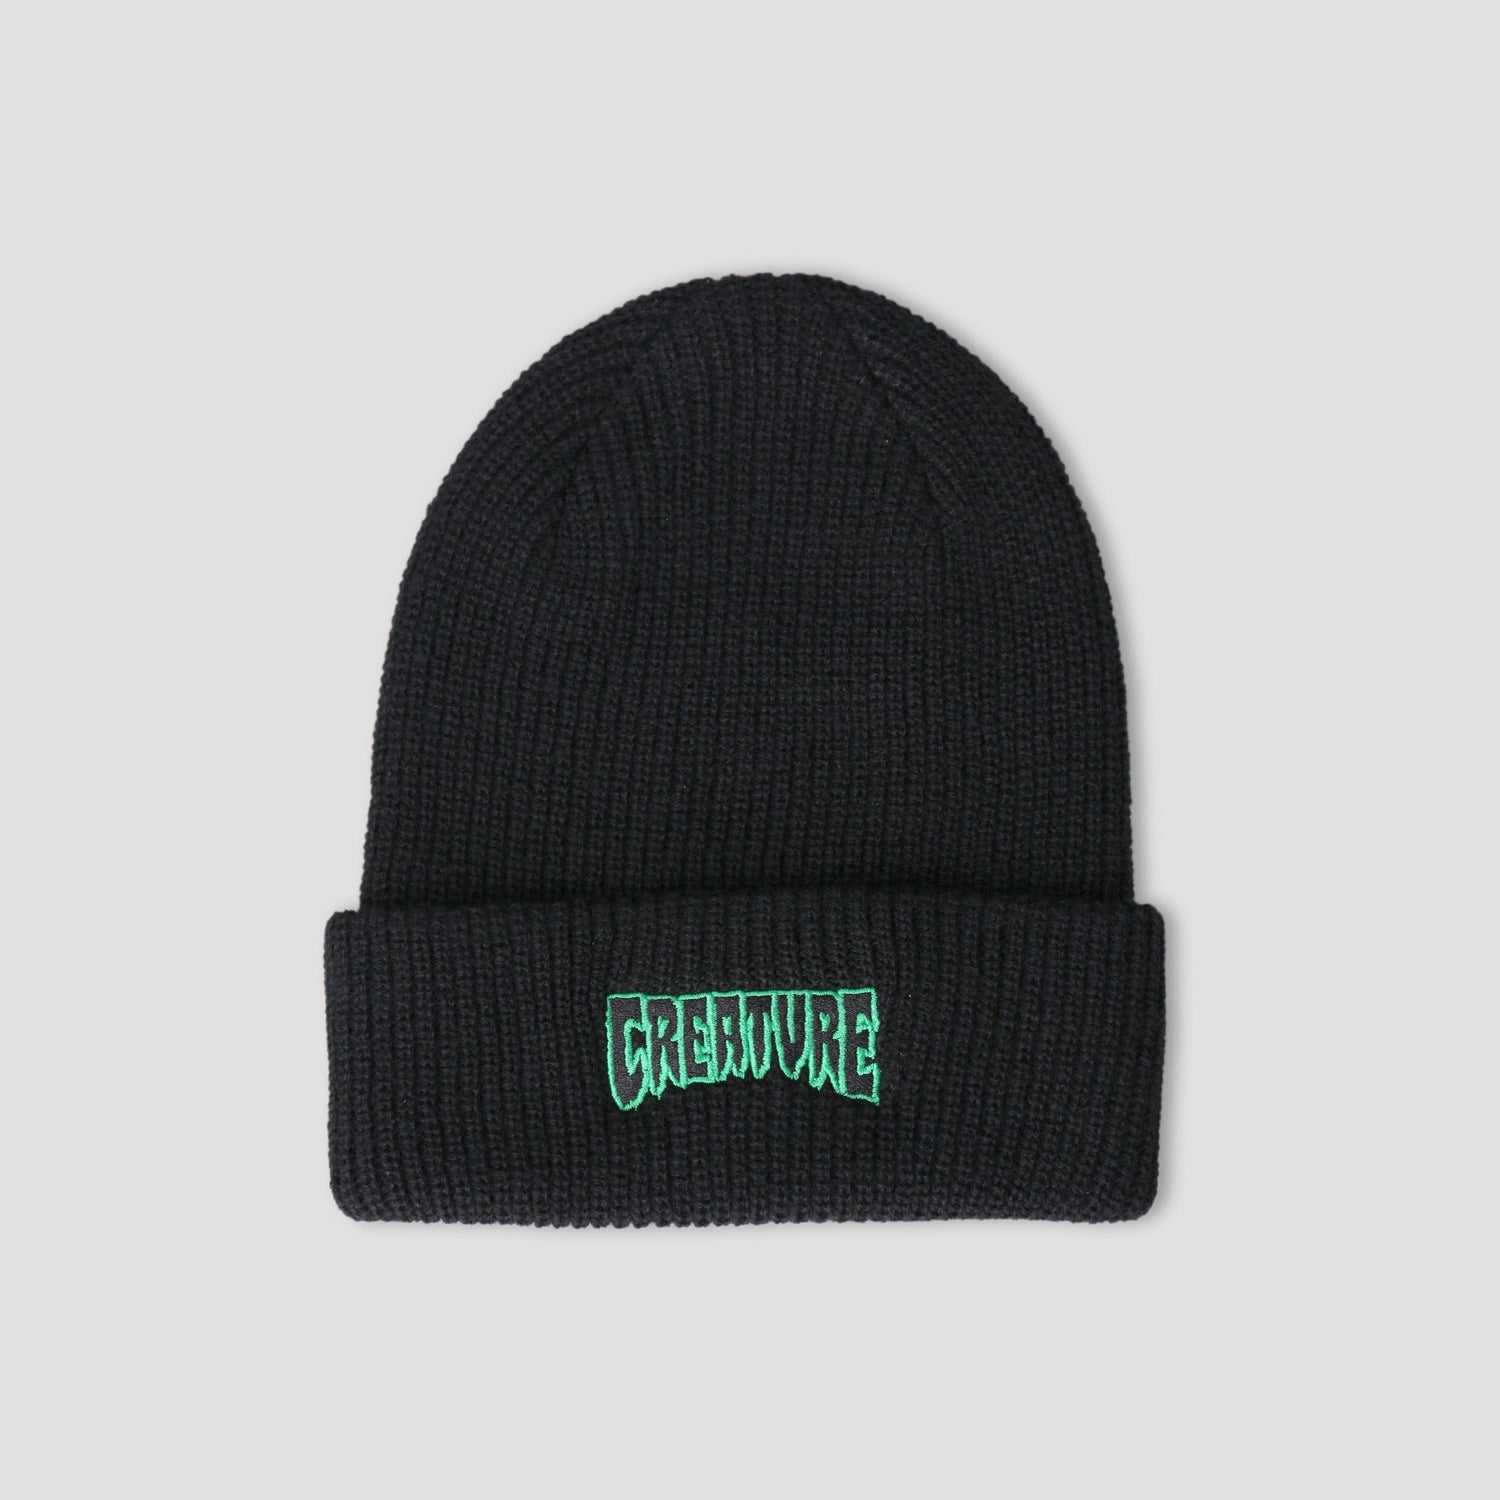 Creature Skateboards & Clothing